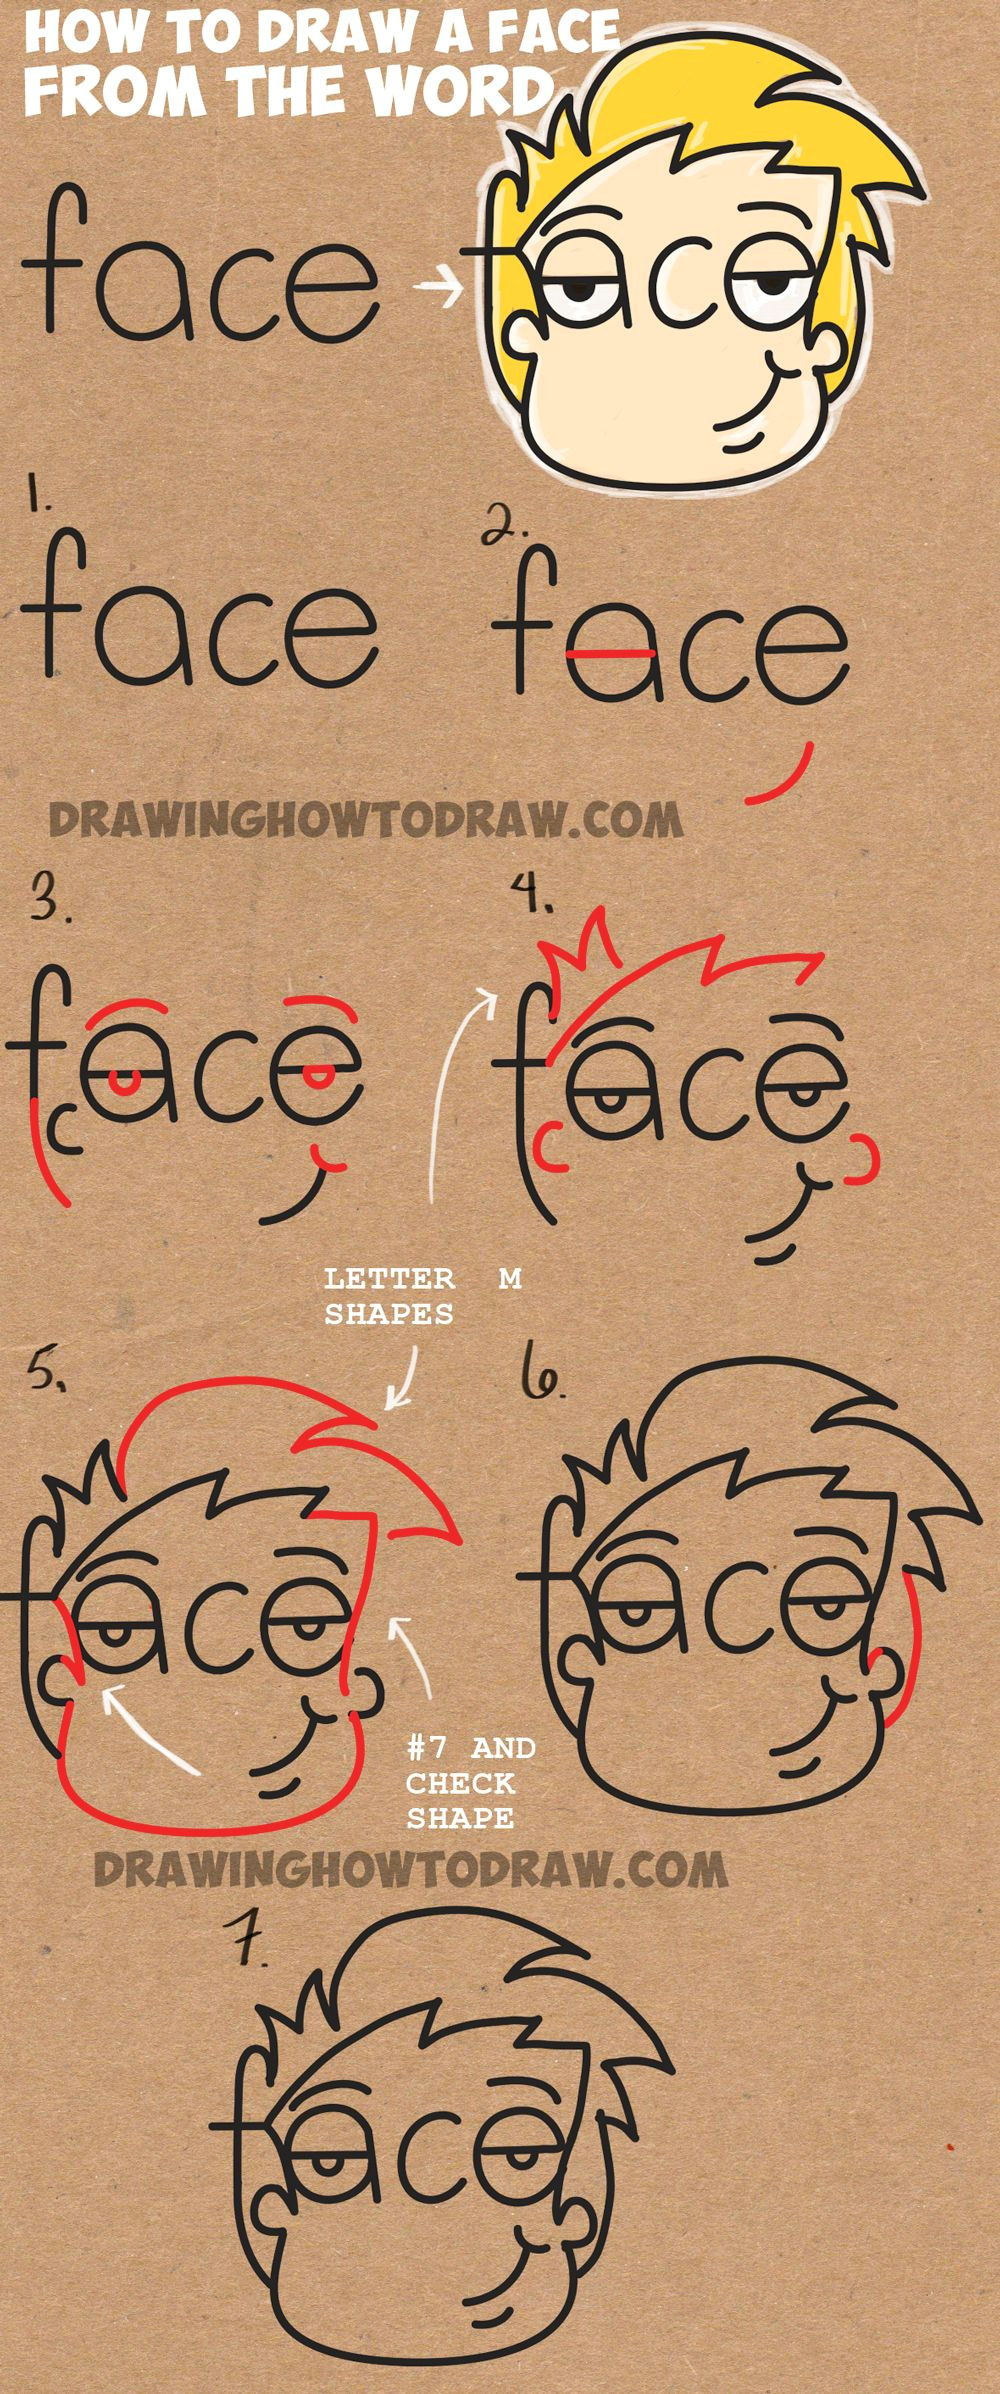 Drawing Cartoons From Letters How to Draw Cartoon Faces From the Word Face Easy Step by Step